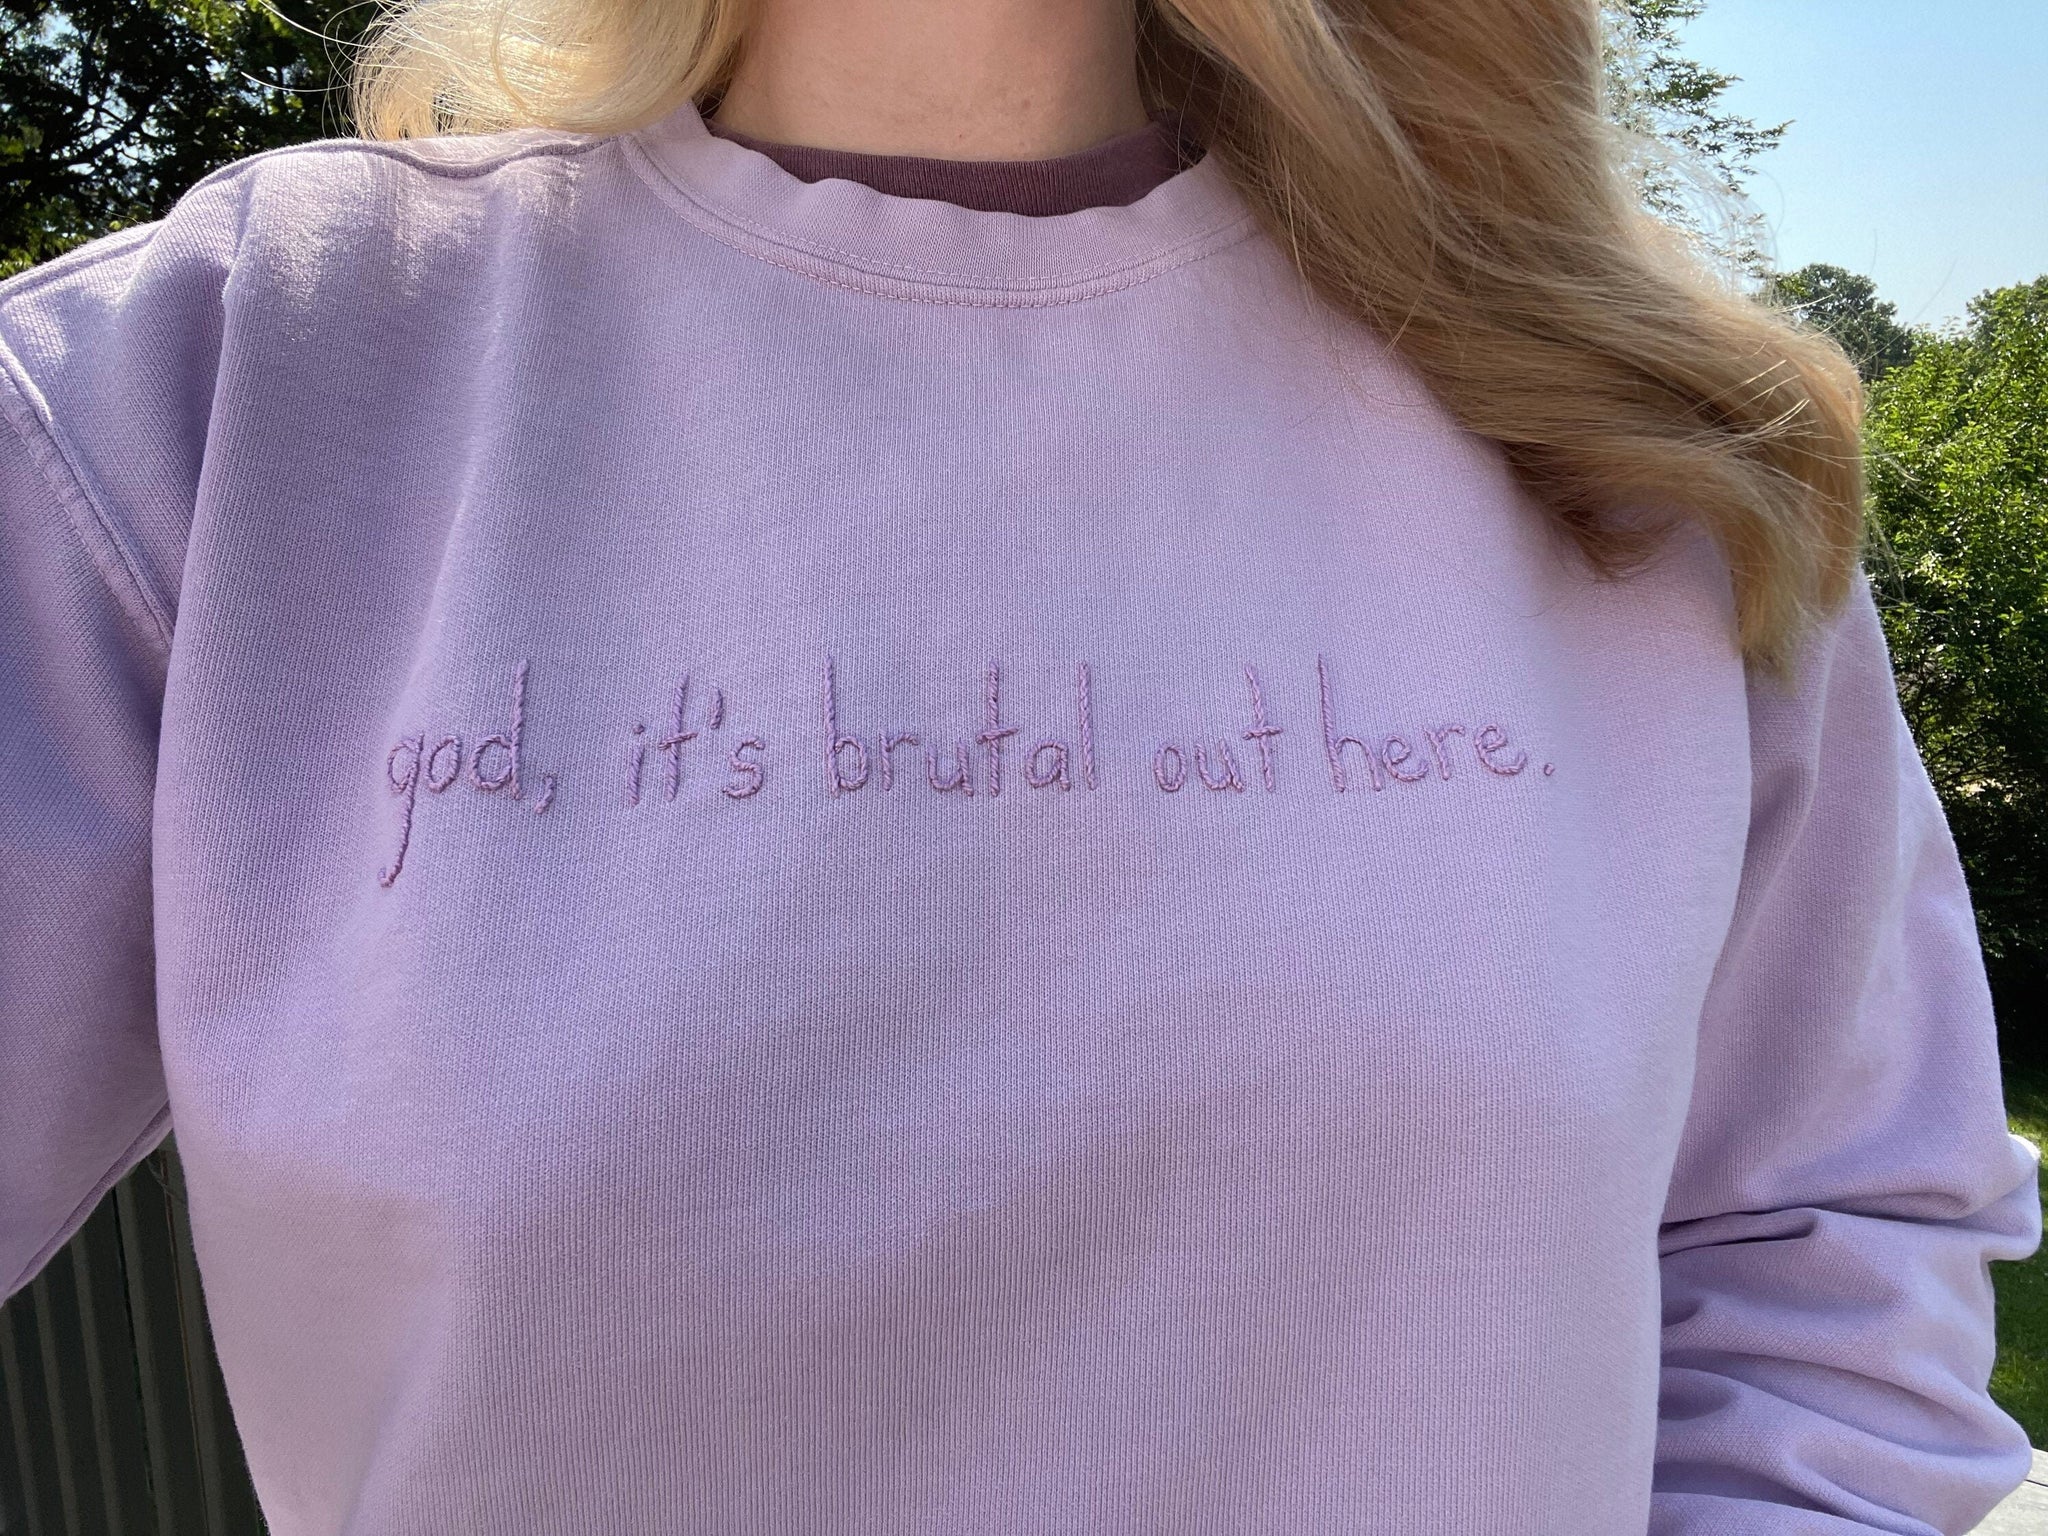 God, It’s Brutal Out HereHand Embroidered Sweatshirt